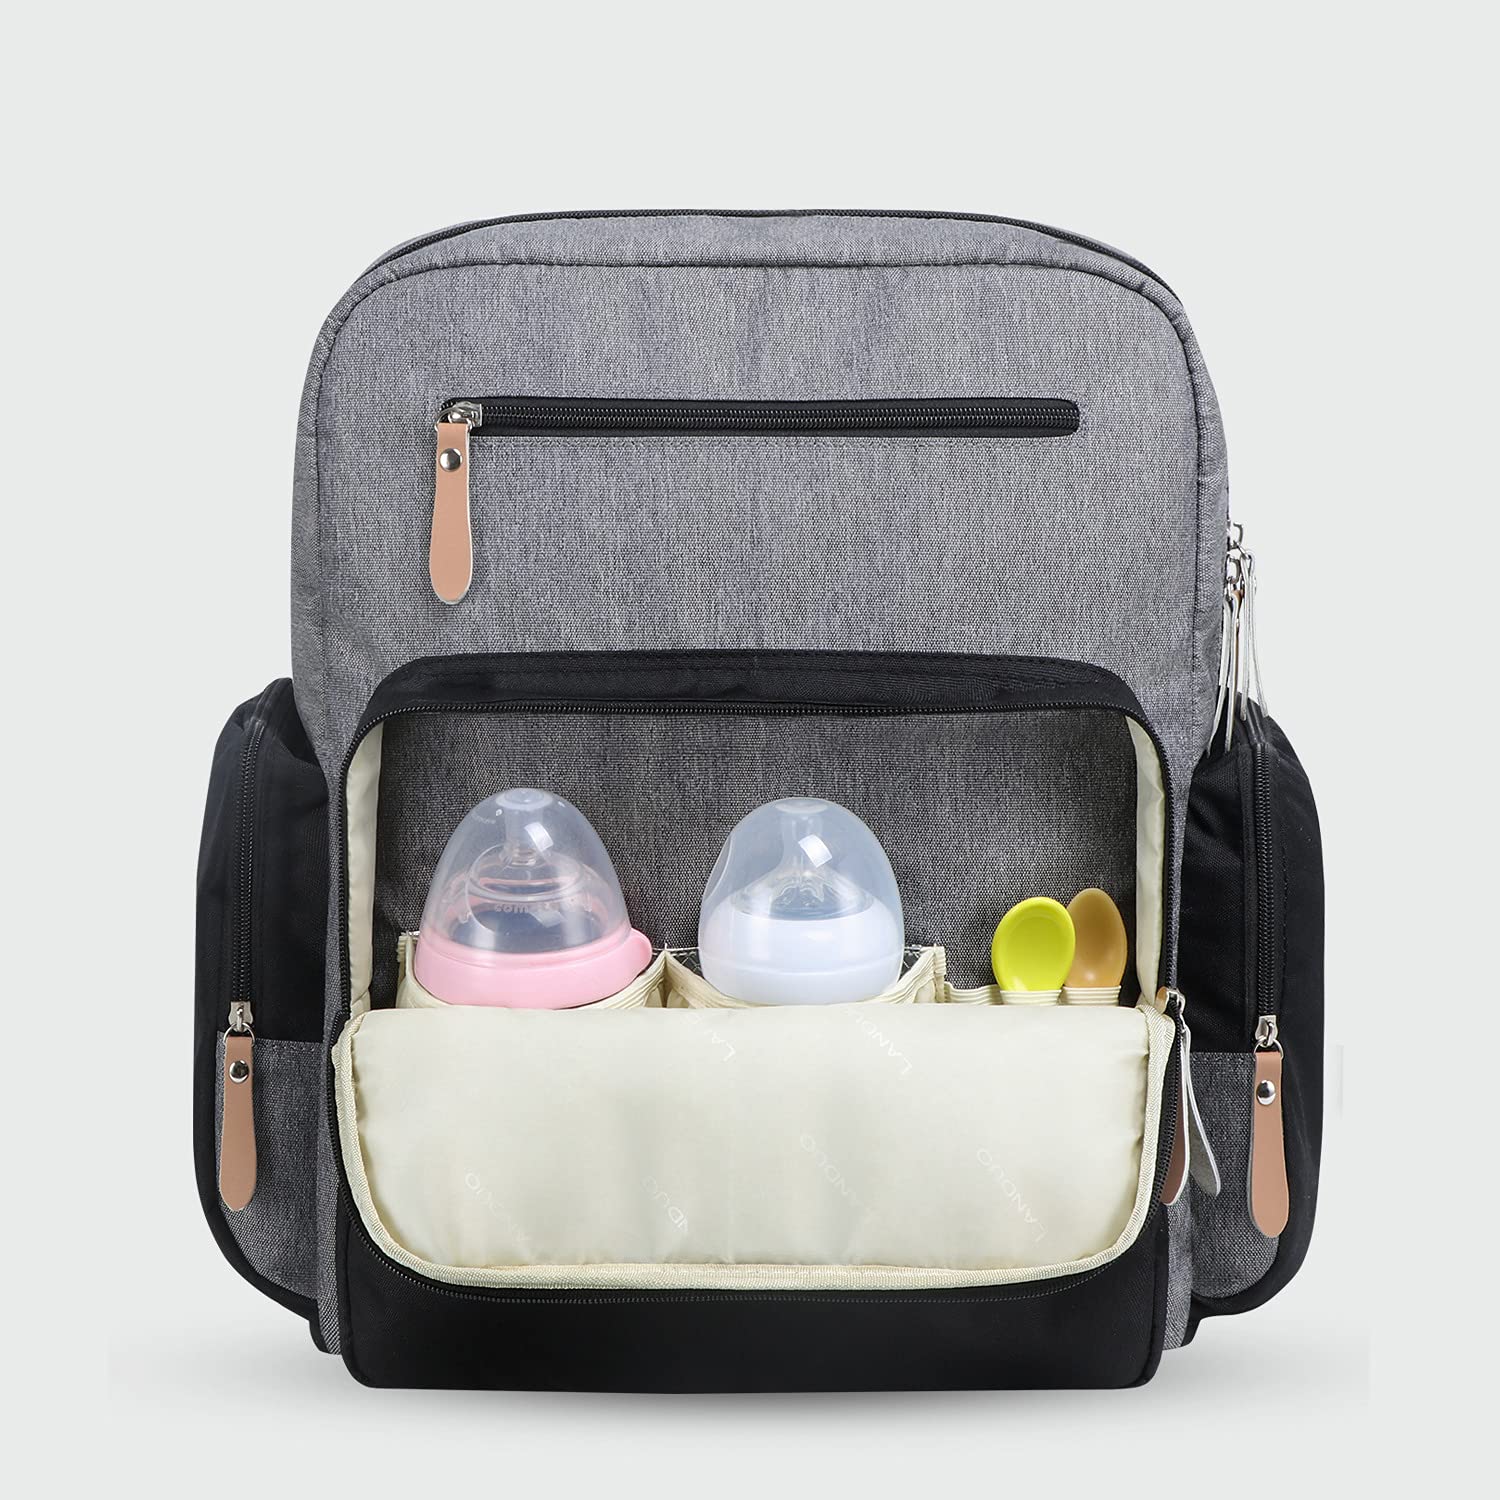 Land diaper bag multi-function waterproof travel backpack nappy bags insulated compartment pockets wipes pocket